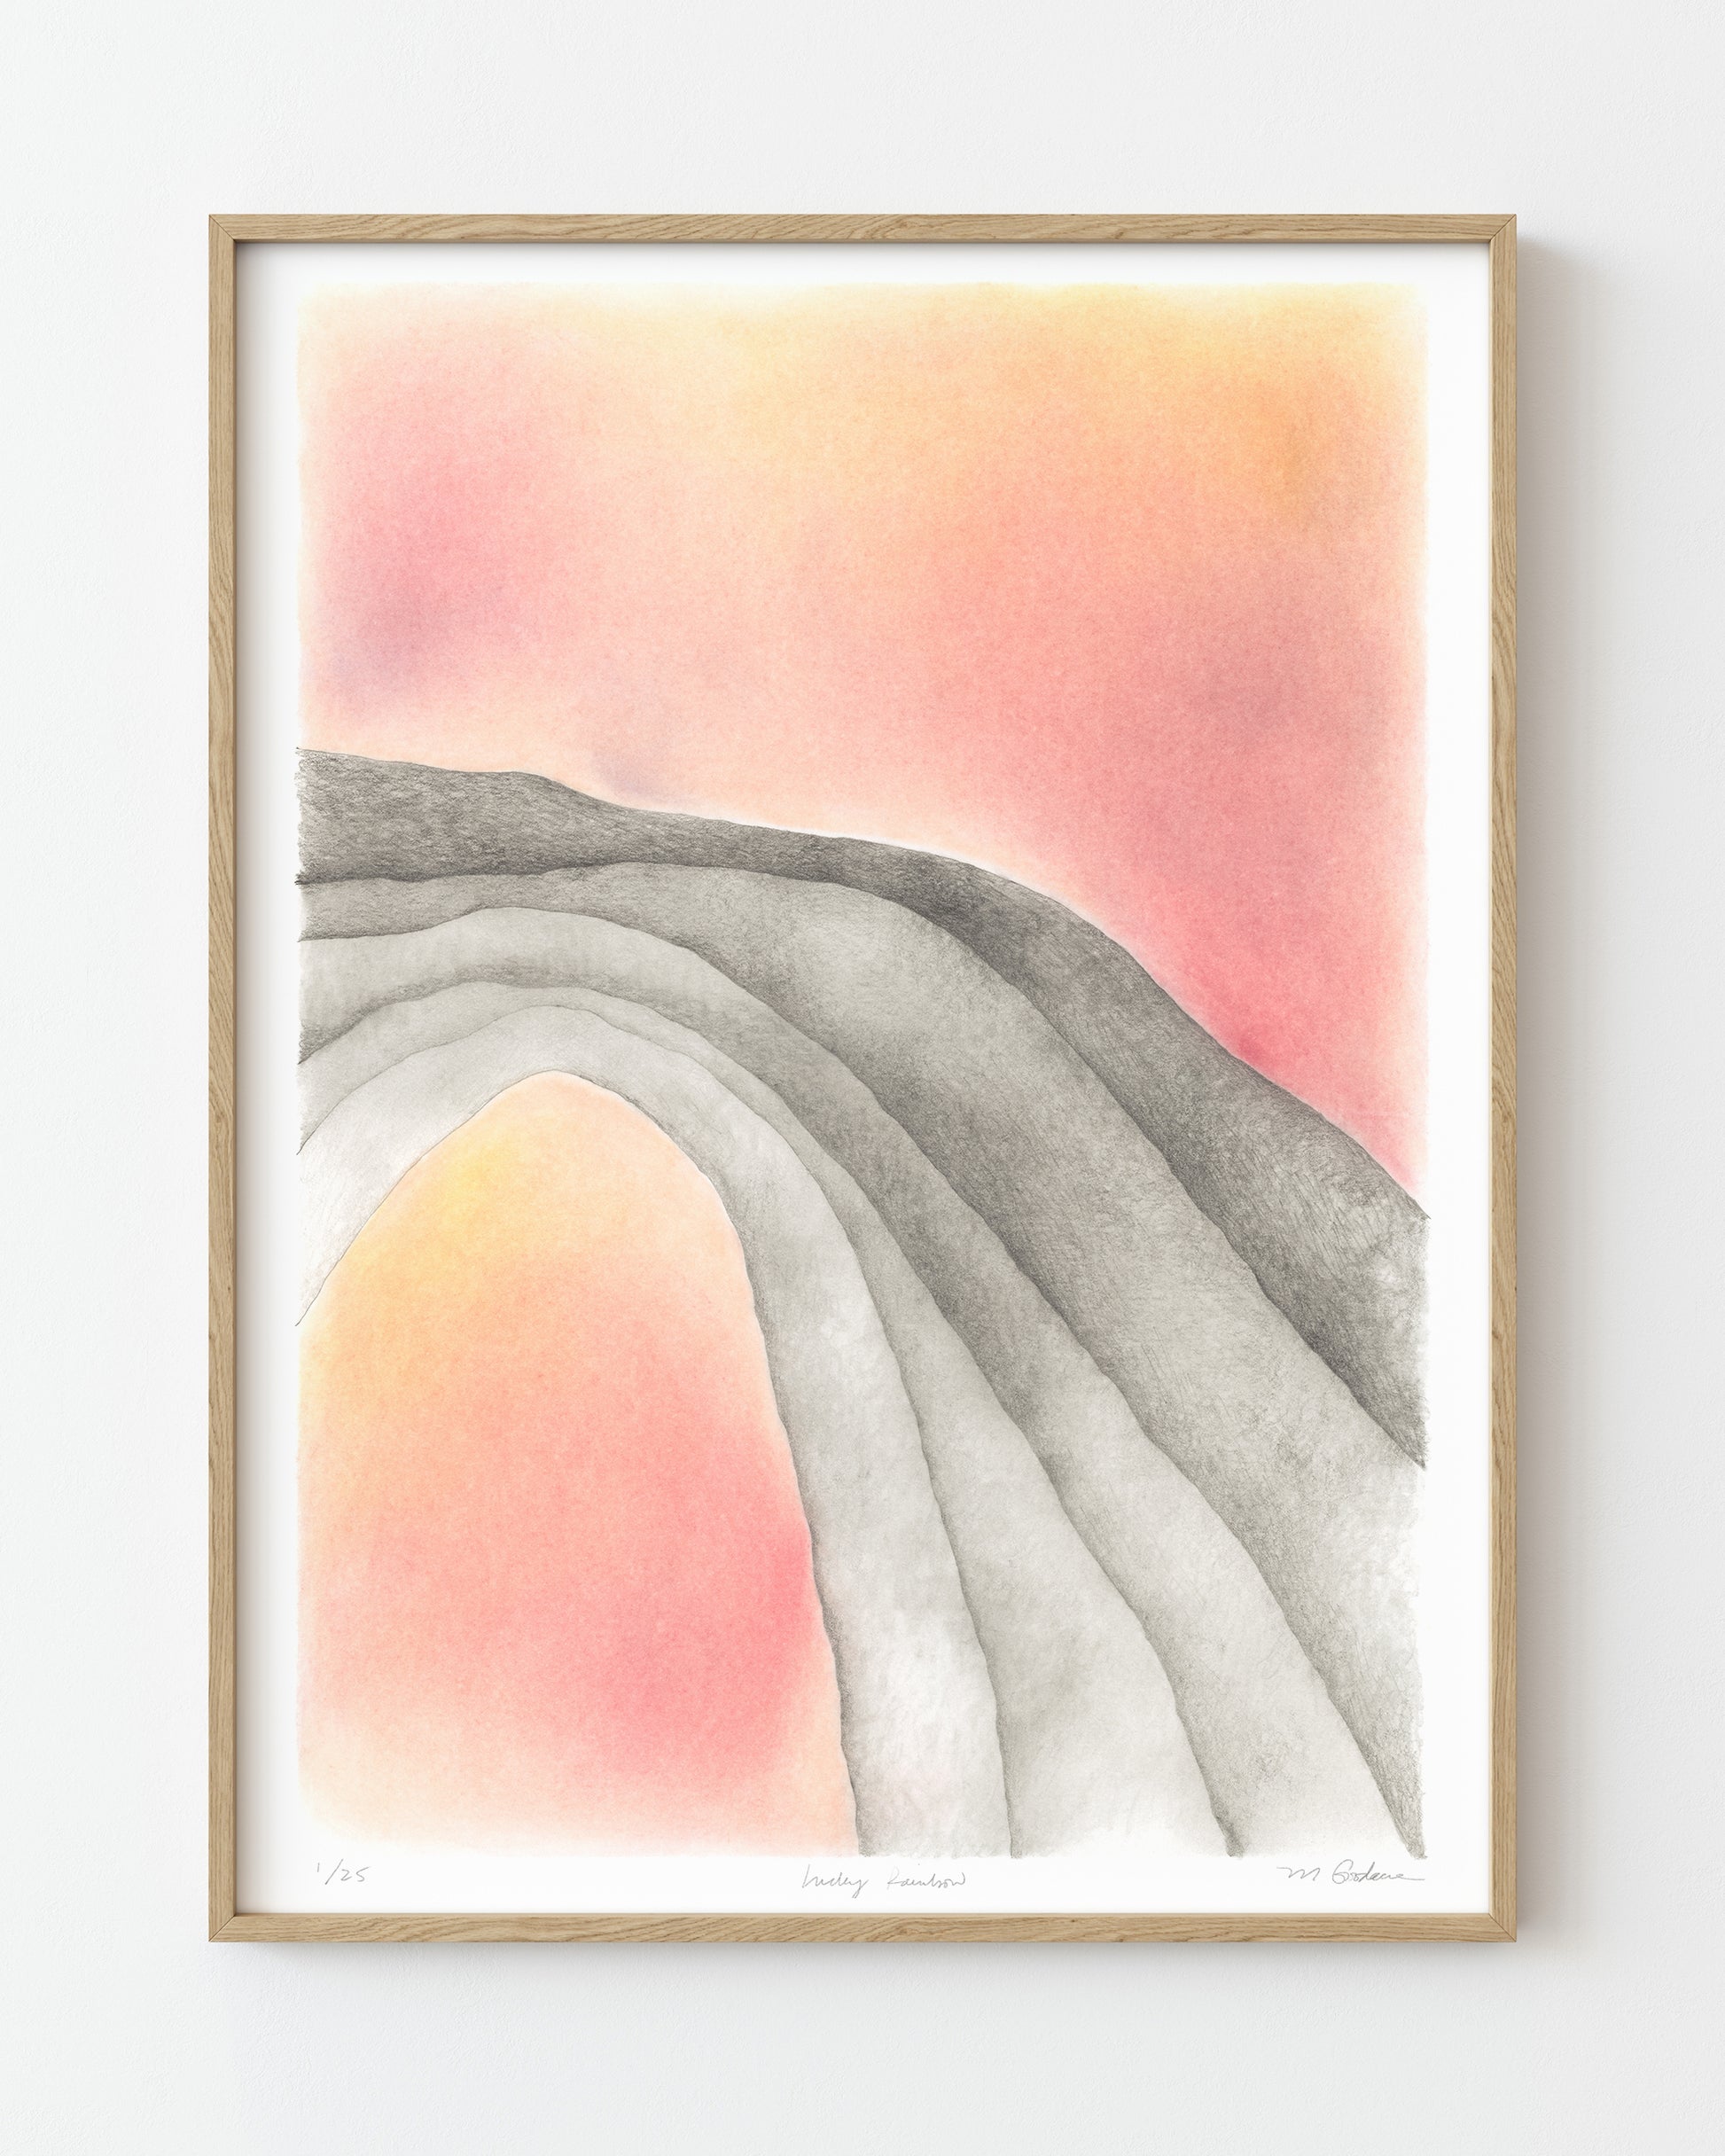 Framed surreal graphite drawing of an archway against sunset colors.